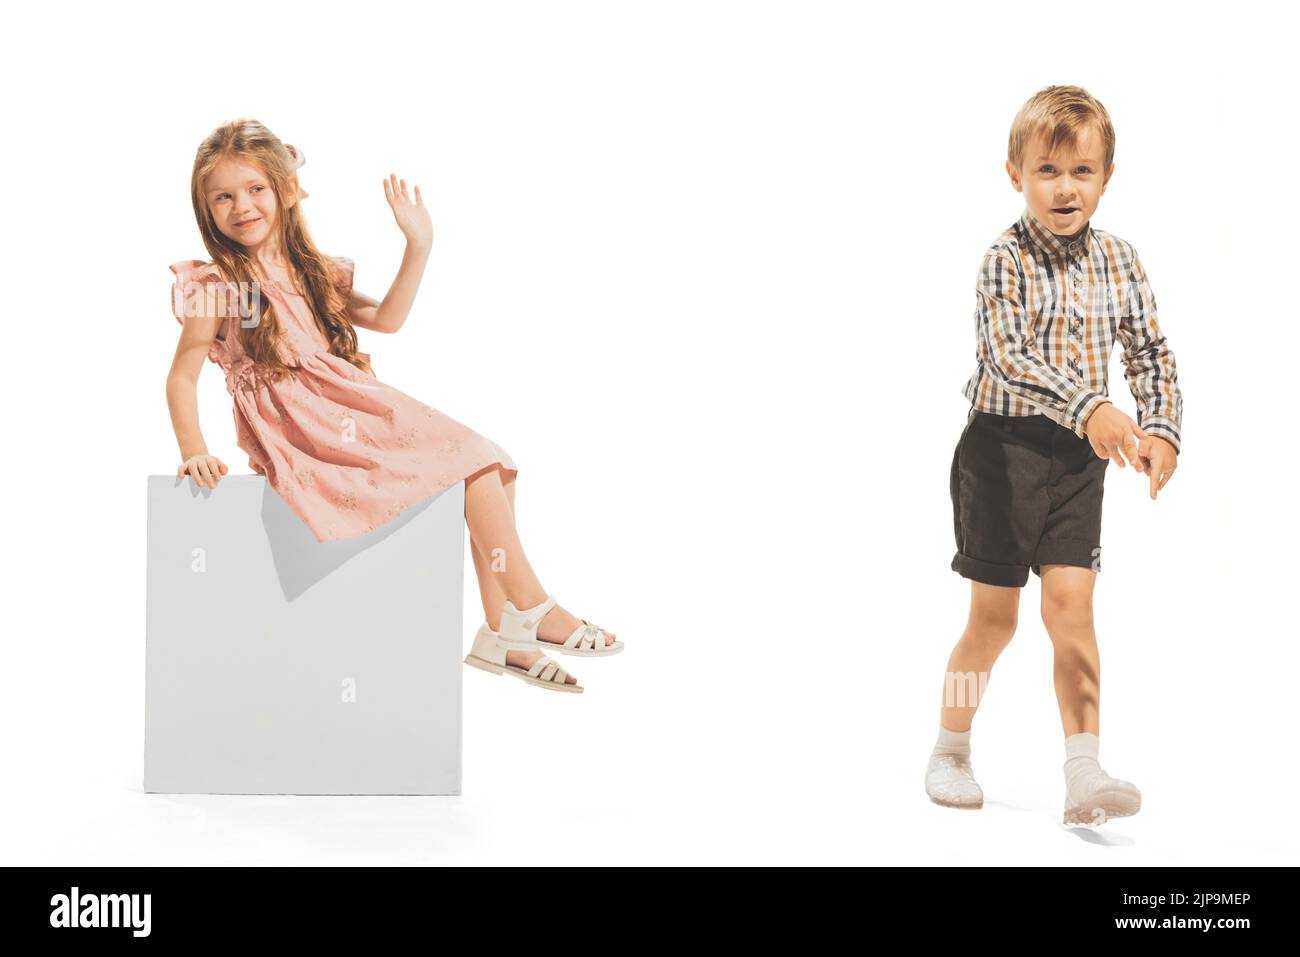 Portrait of little boy and girl, children playing together isolated over white studio background. Having fun together Stock Photo